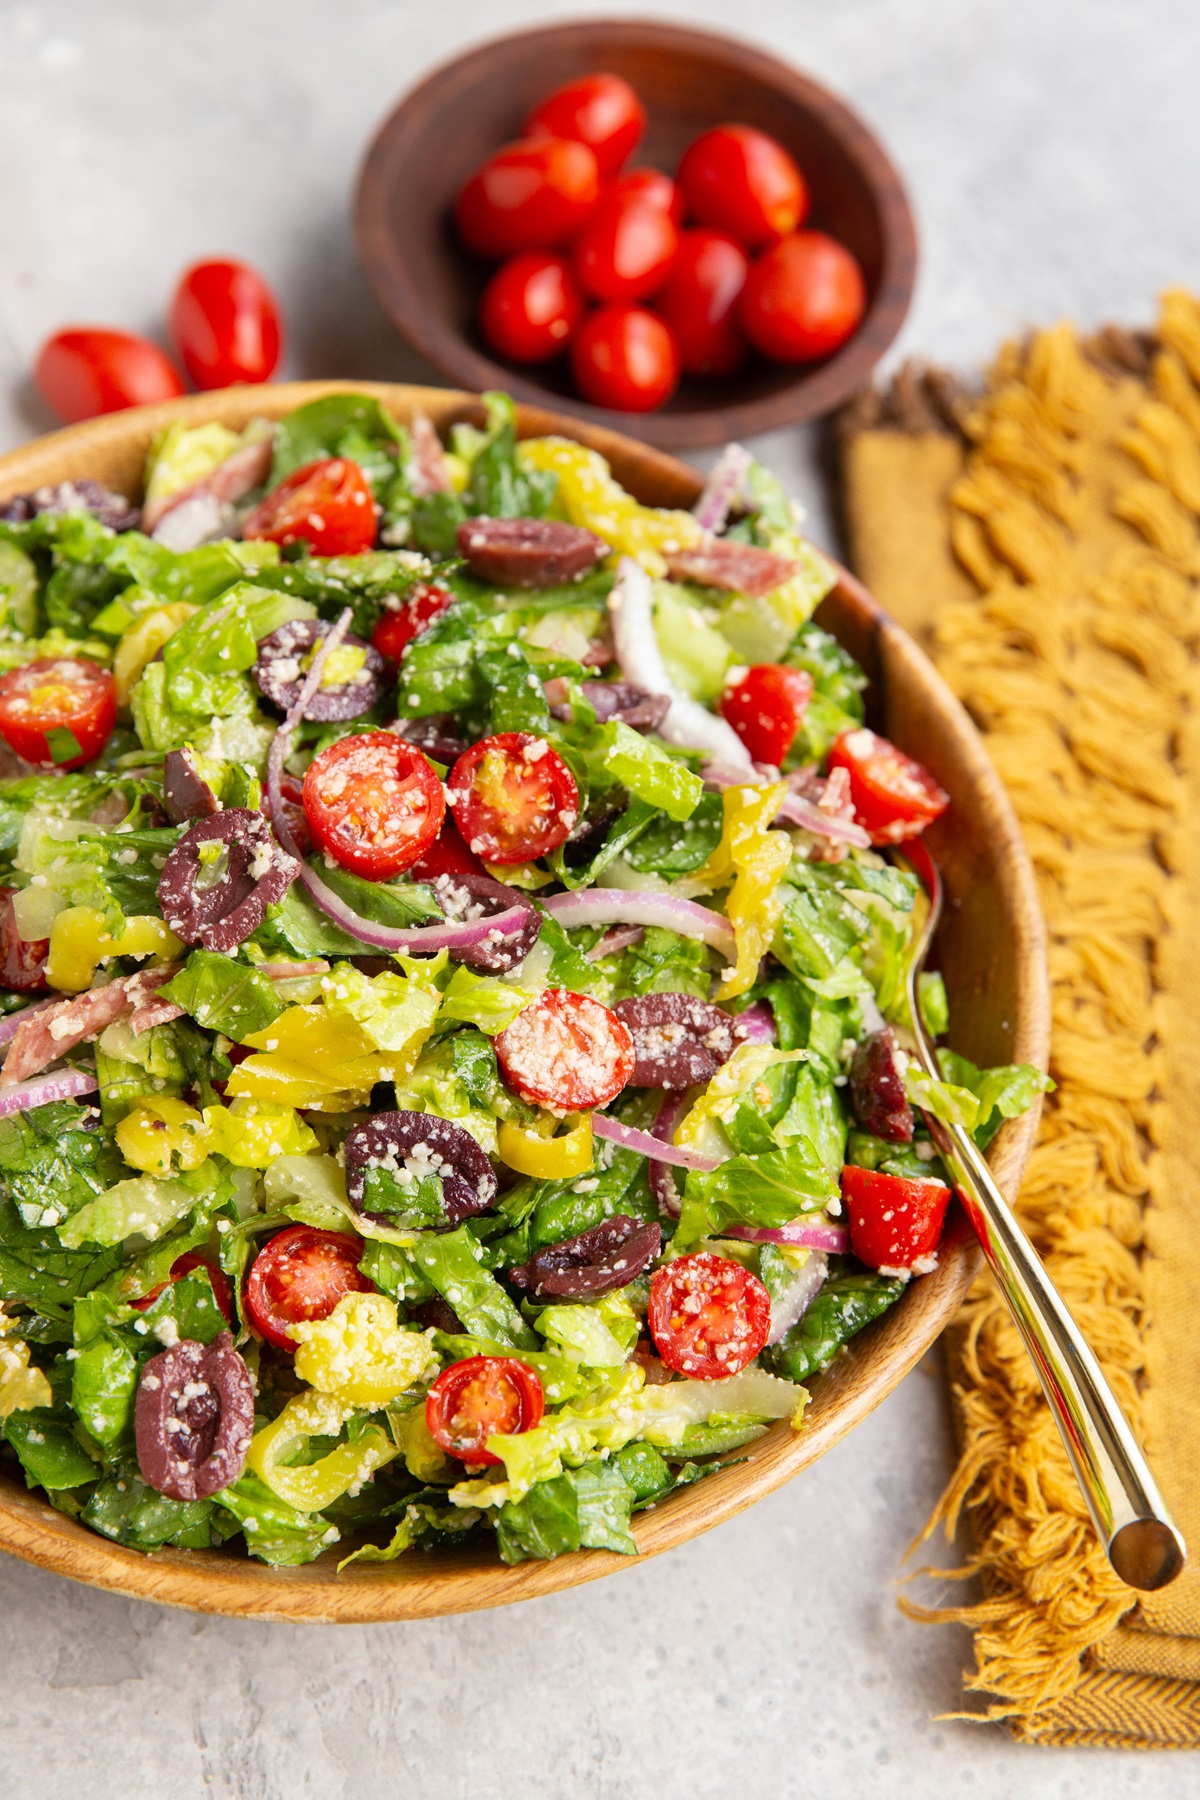 Wooden bowl full of Italian salad with fresh veggies and homemade dressing